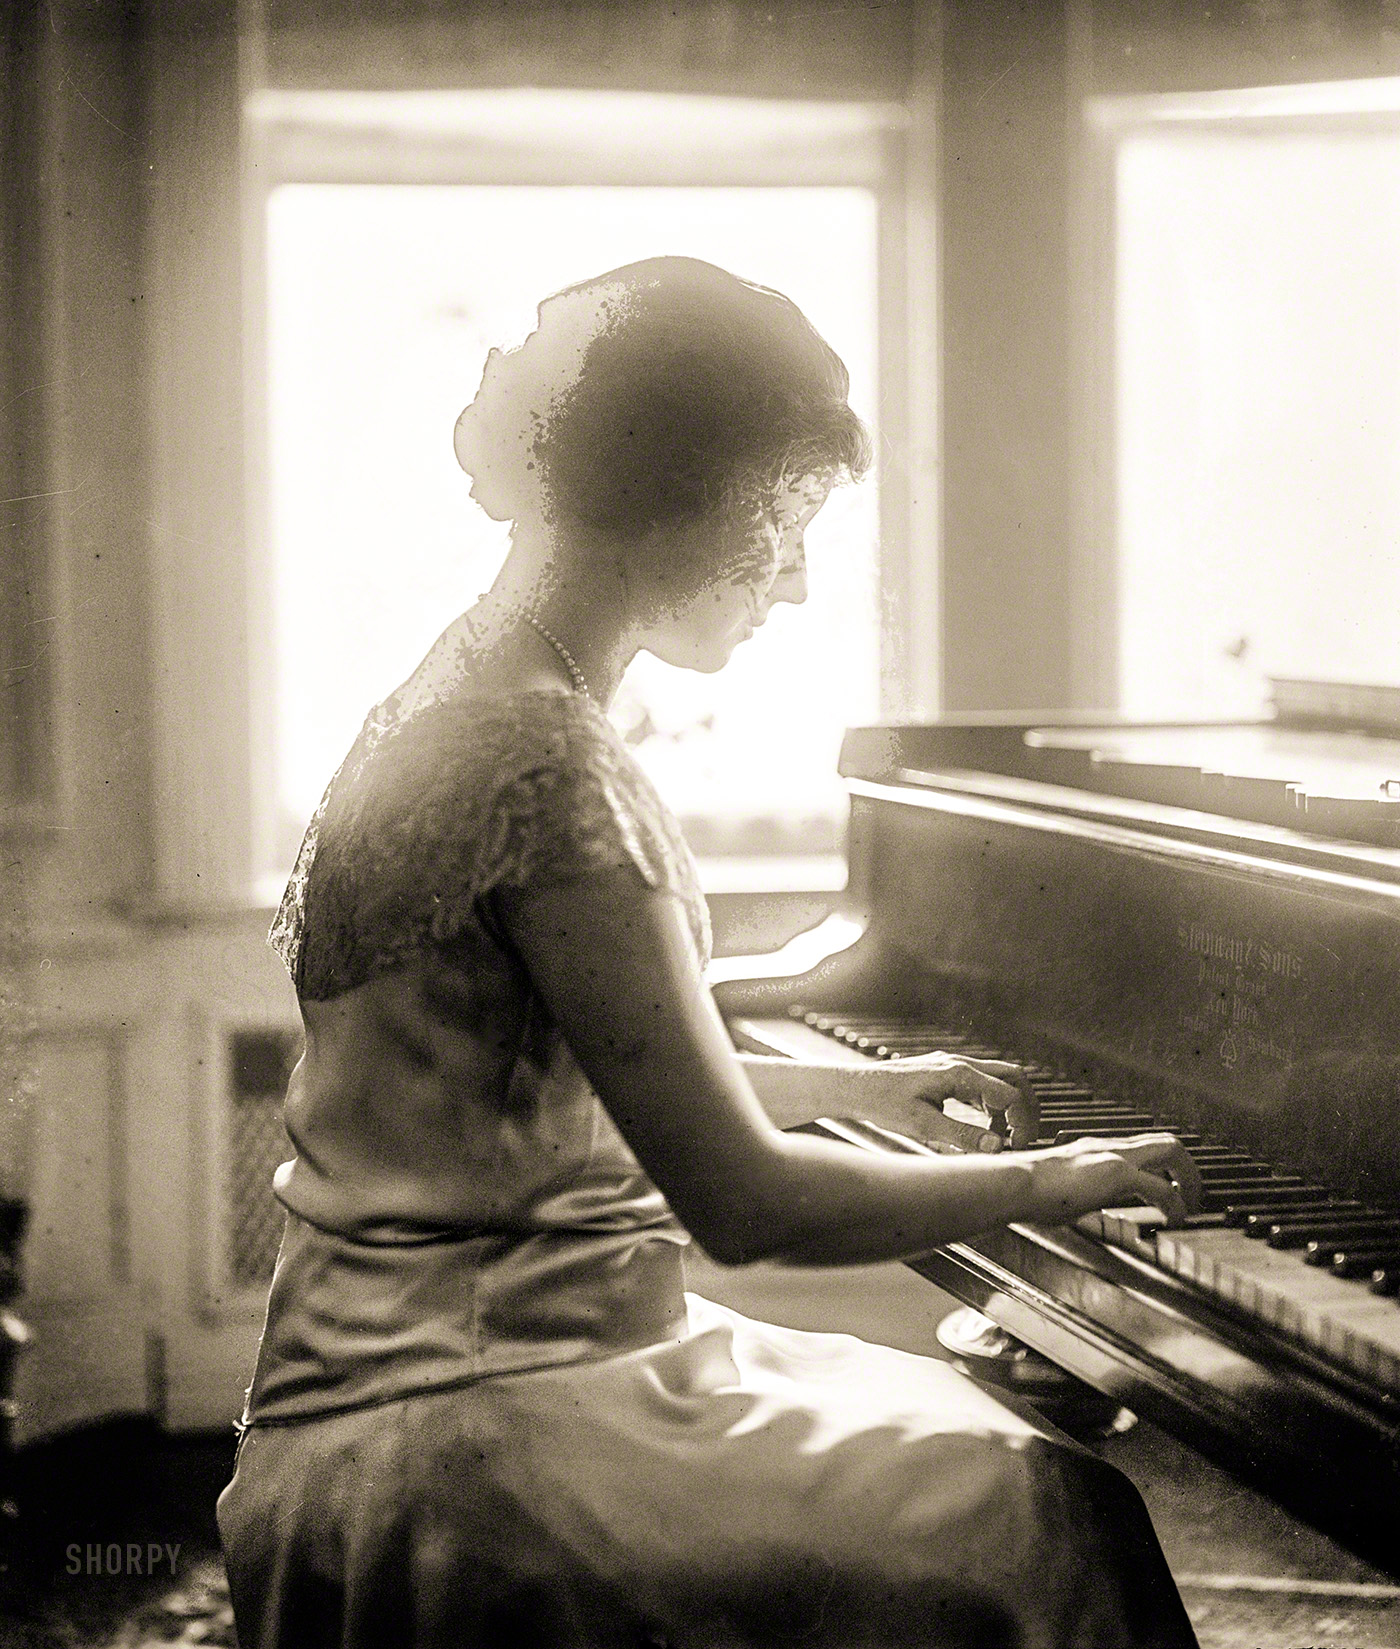 Washington, D.C., 1929. "Miss Styron." Sade Coghill Styron (1889-1982), "well-known authority on old music." 4x5 glass negative. View full size.